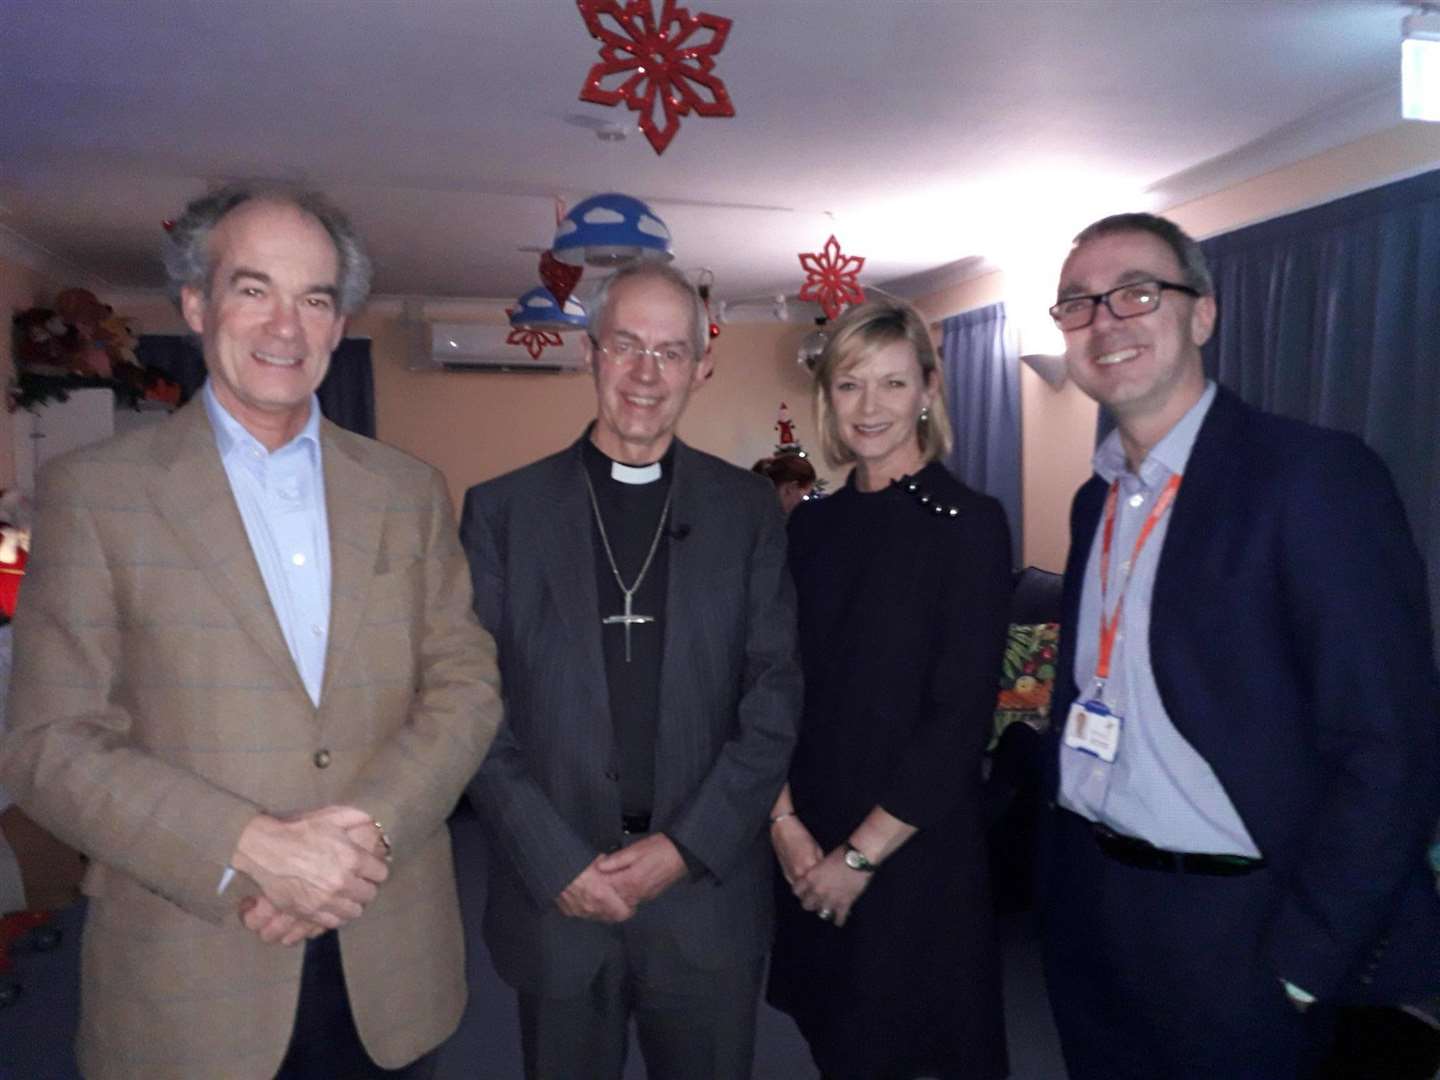 The Archbishop of Canterbury Justin Welby, with Demelza's president Richard Oldfield and chief executive Ryan Campbell